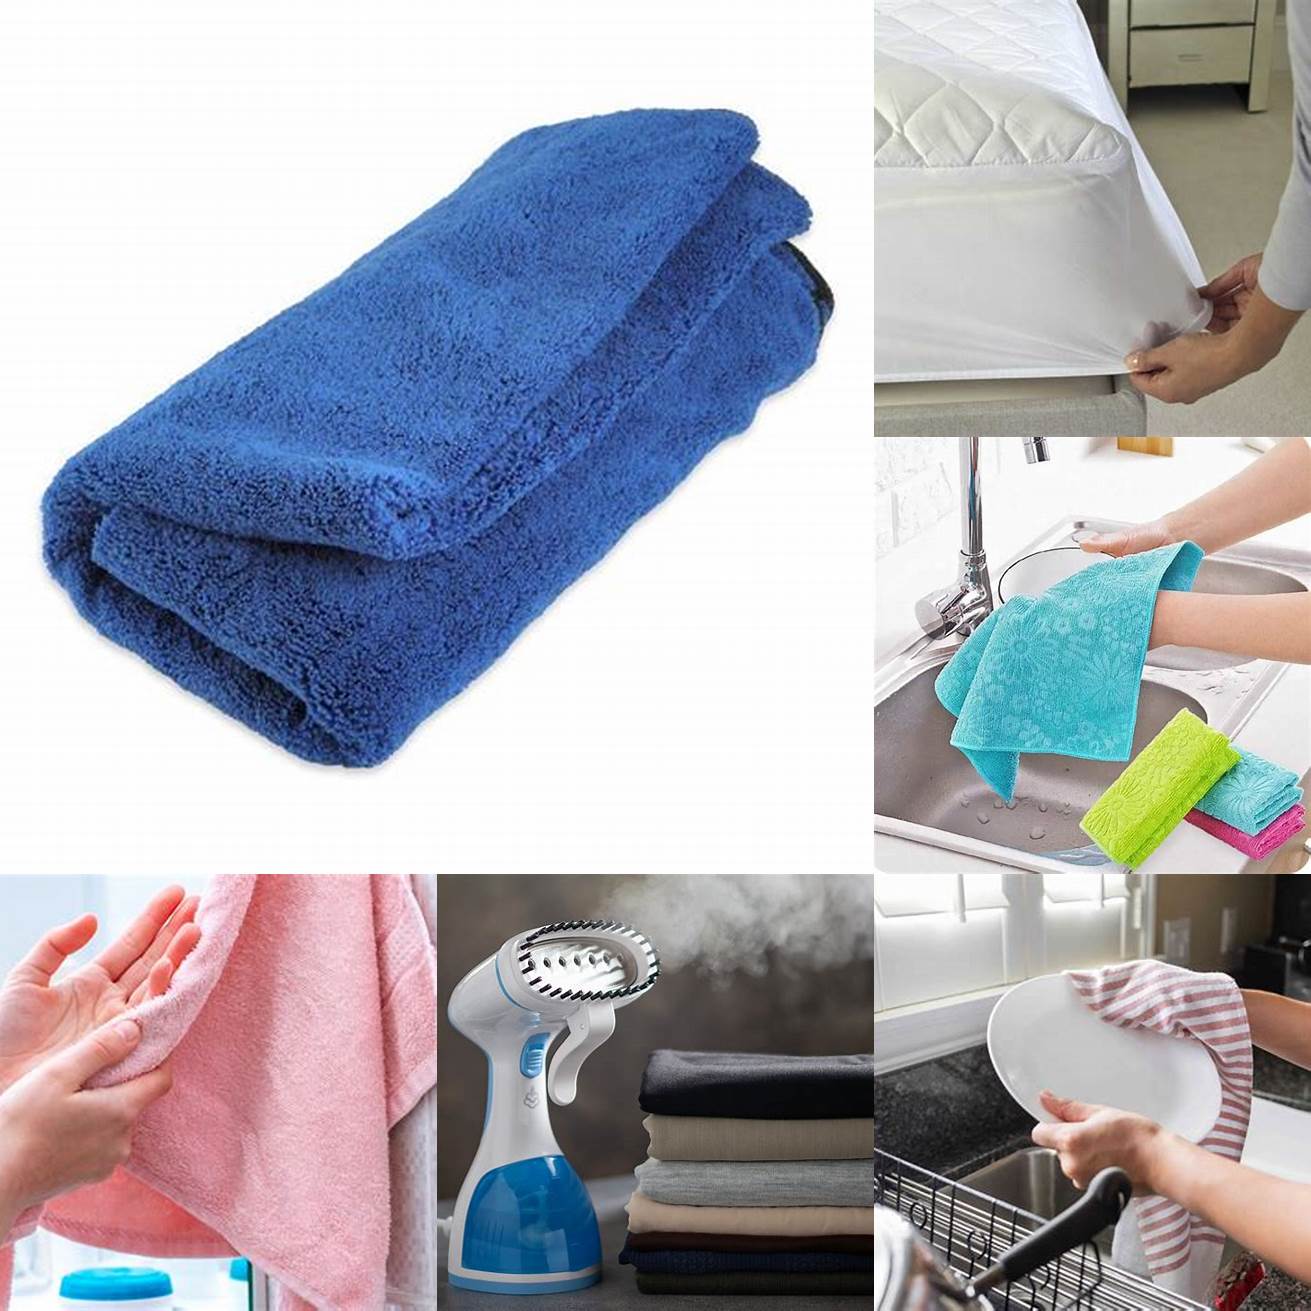 3 Rinse the mat with clean water and dry it with a towel or let it air dry